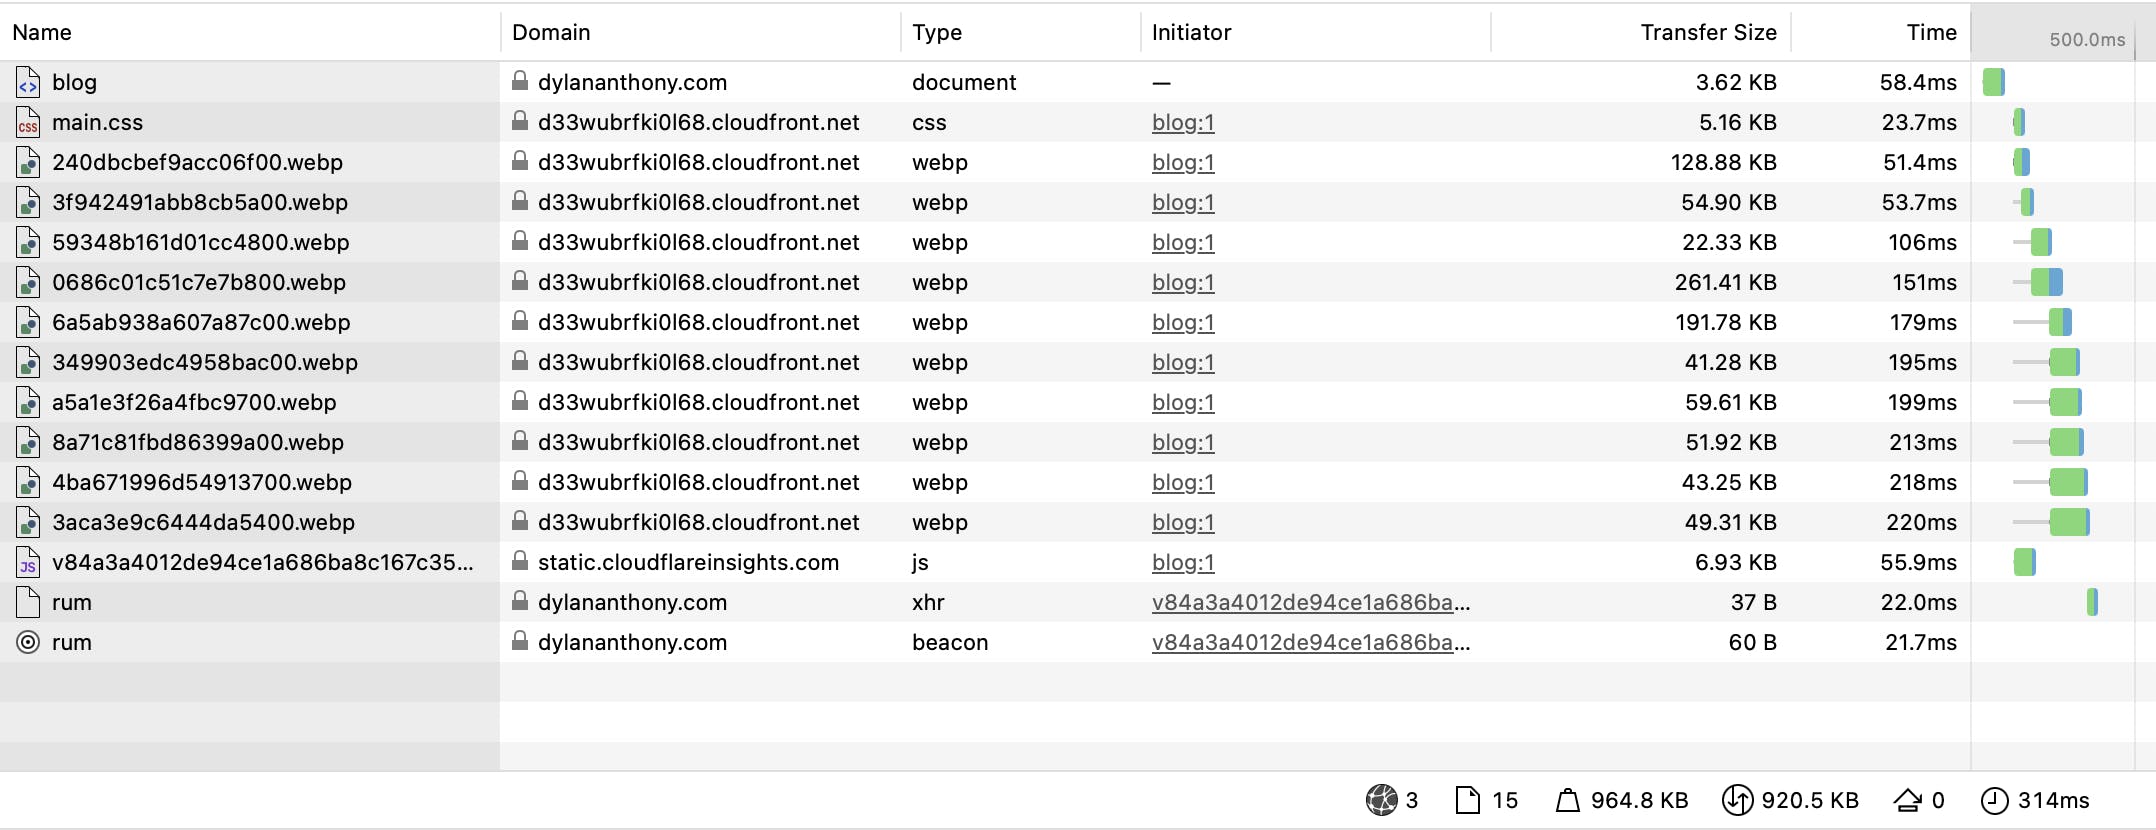 A screenshot of the network view in Safari. There are 15 requests, totaling 920.5KB transferred.